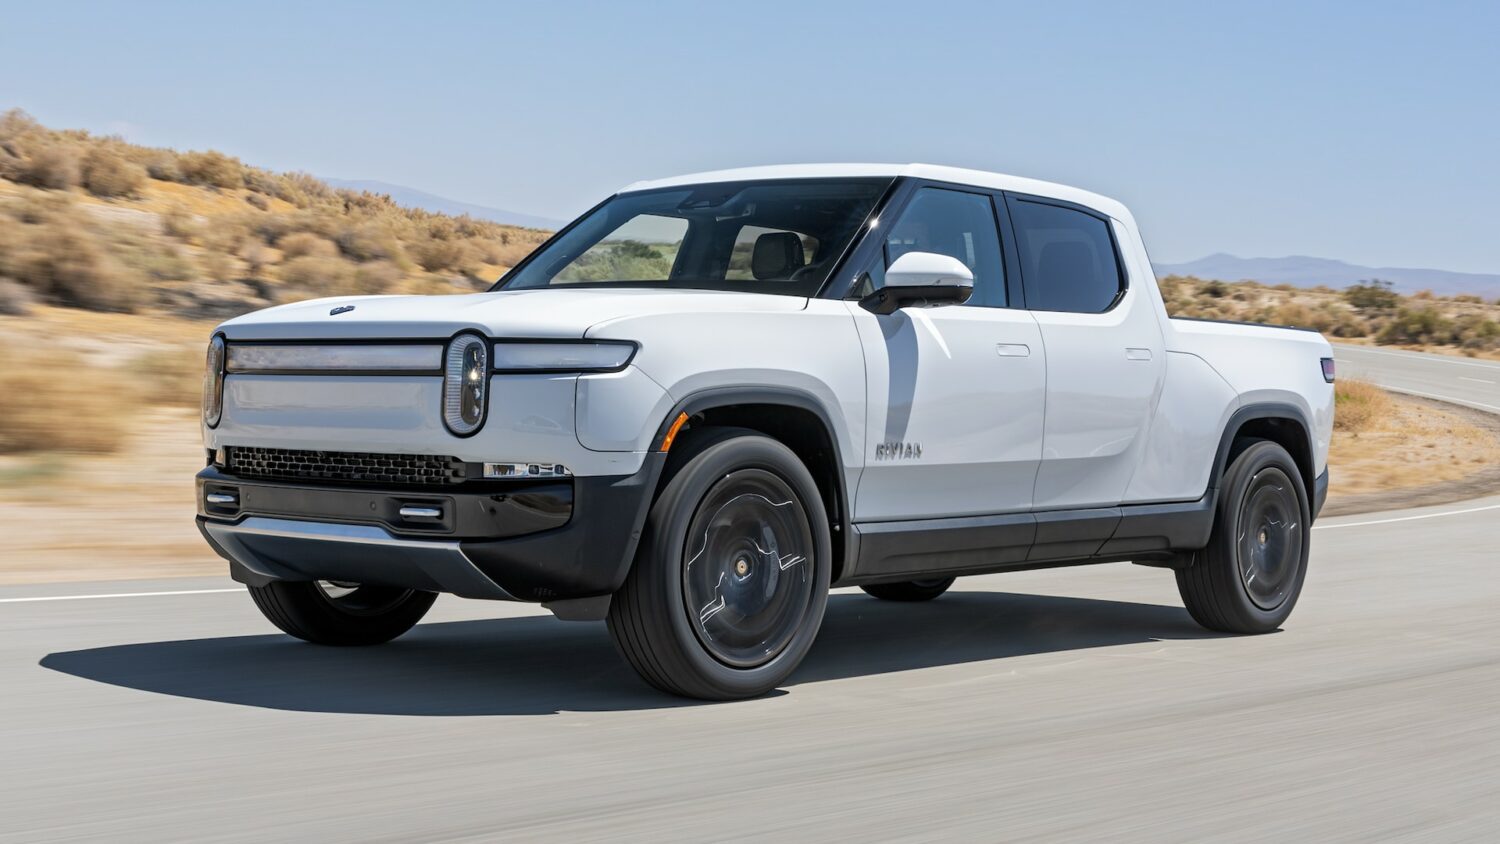 Rivian has announced the maximum driving range for the new dual motor configuration of the R1T electric pickup.